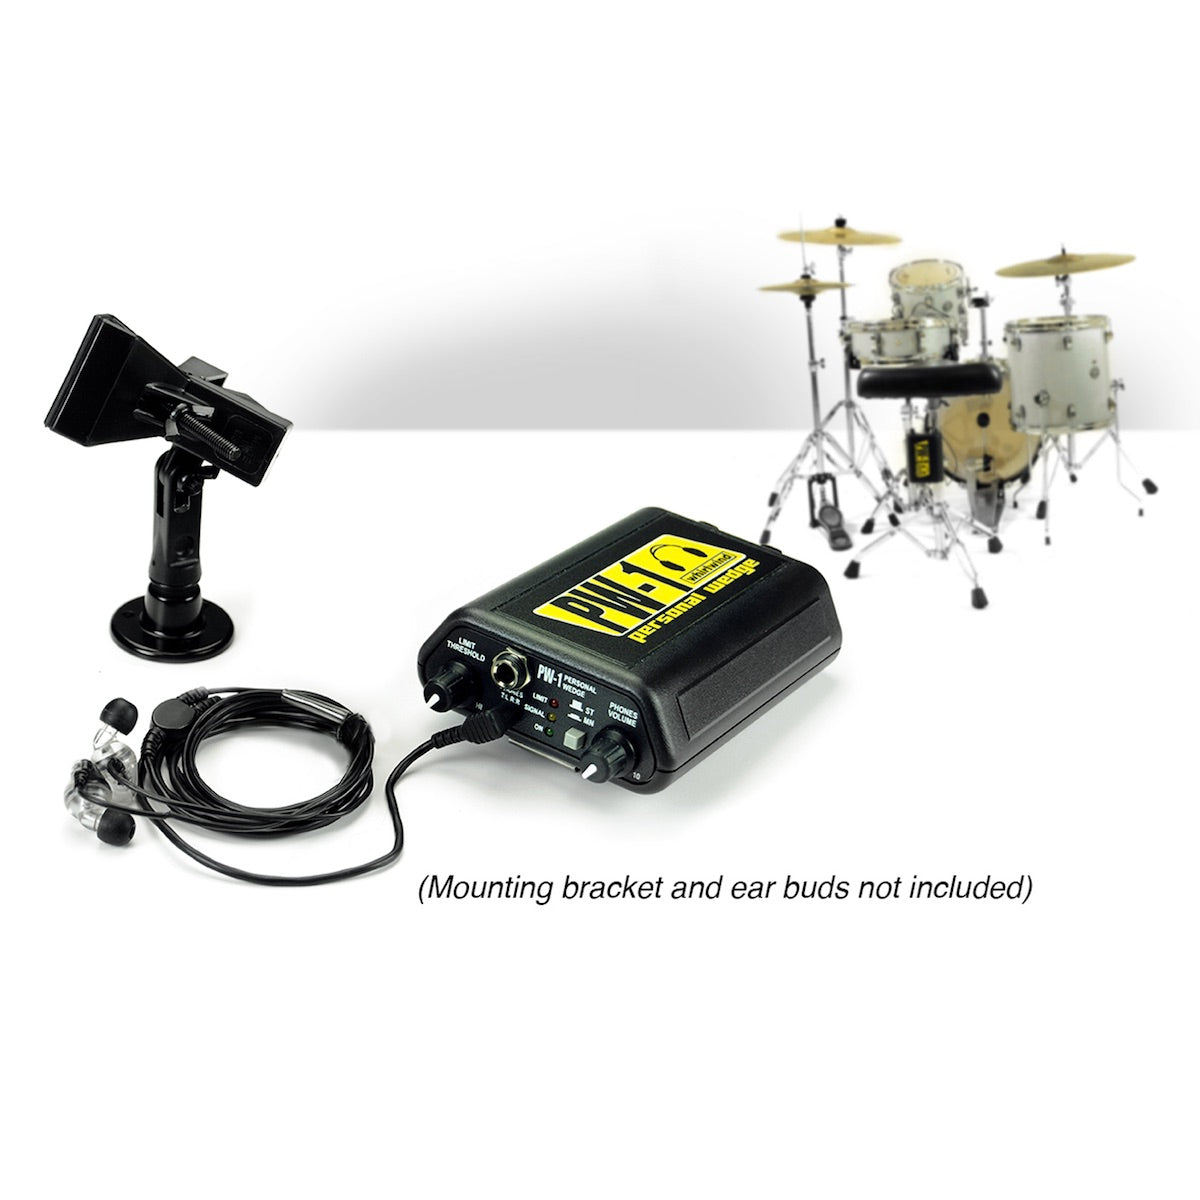 Whirlwind PW-1 Personal Wedge - High-power Stereo Headphone Driver, mounting bracket and ear buds not included